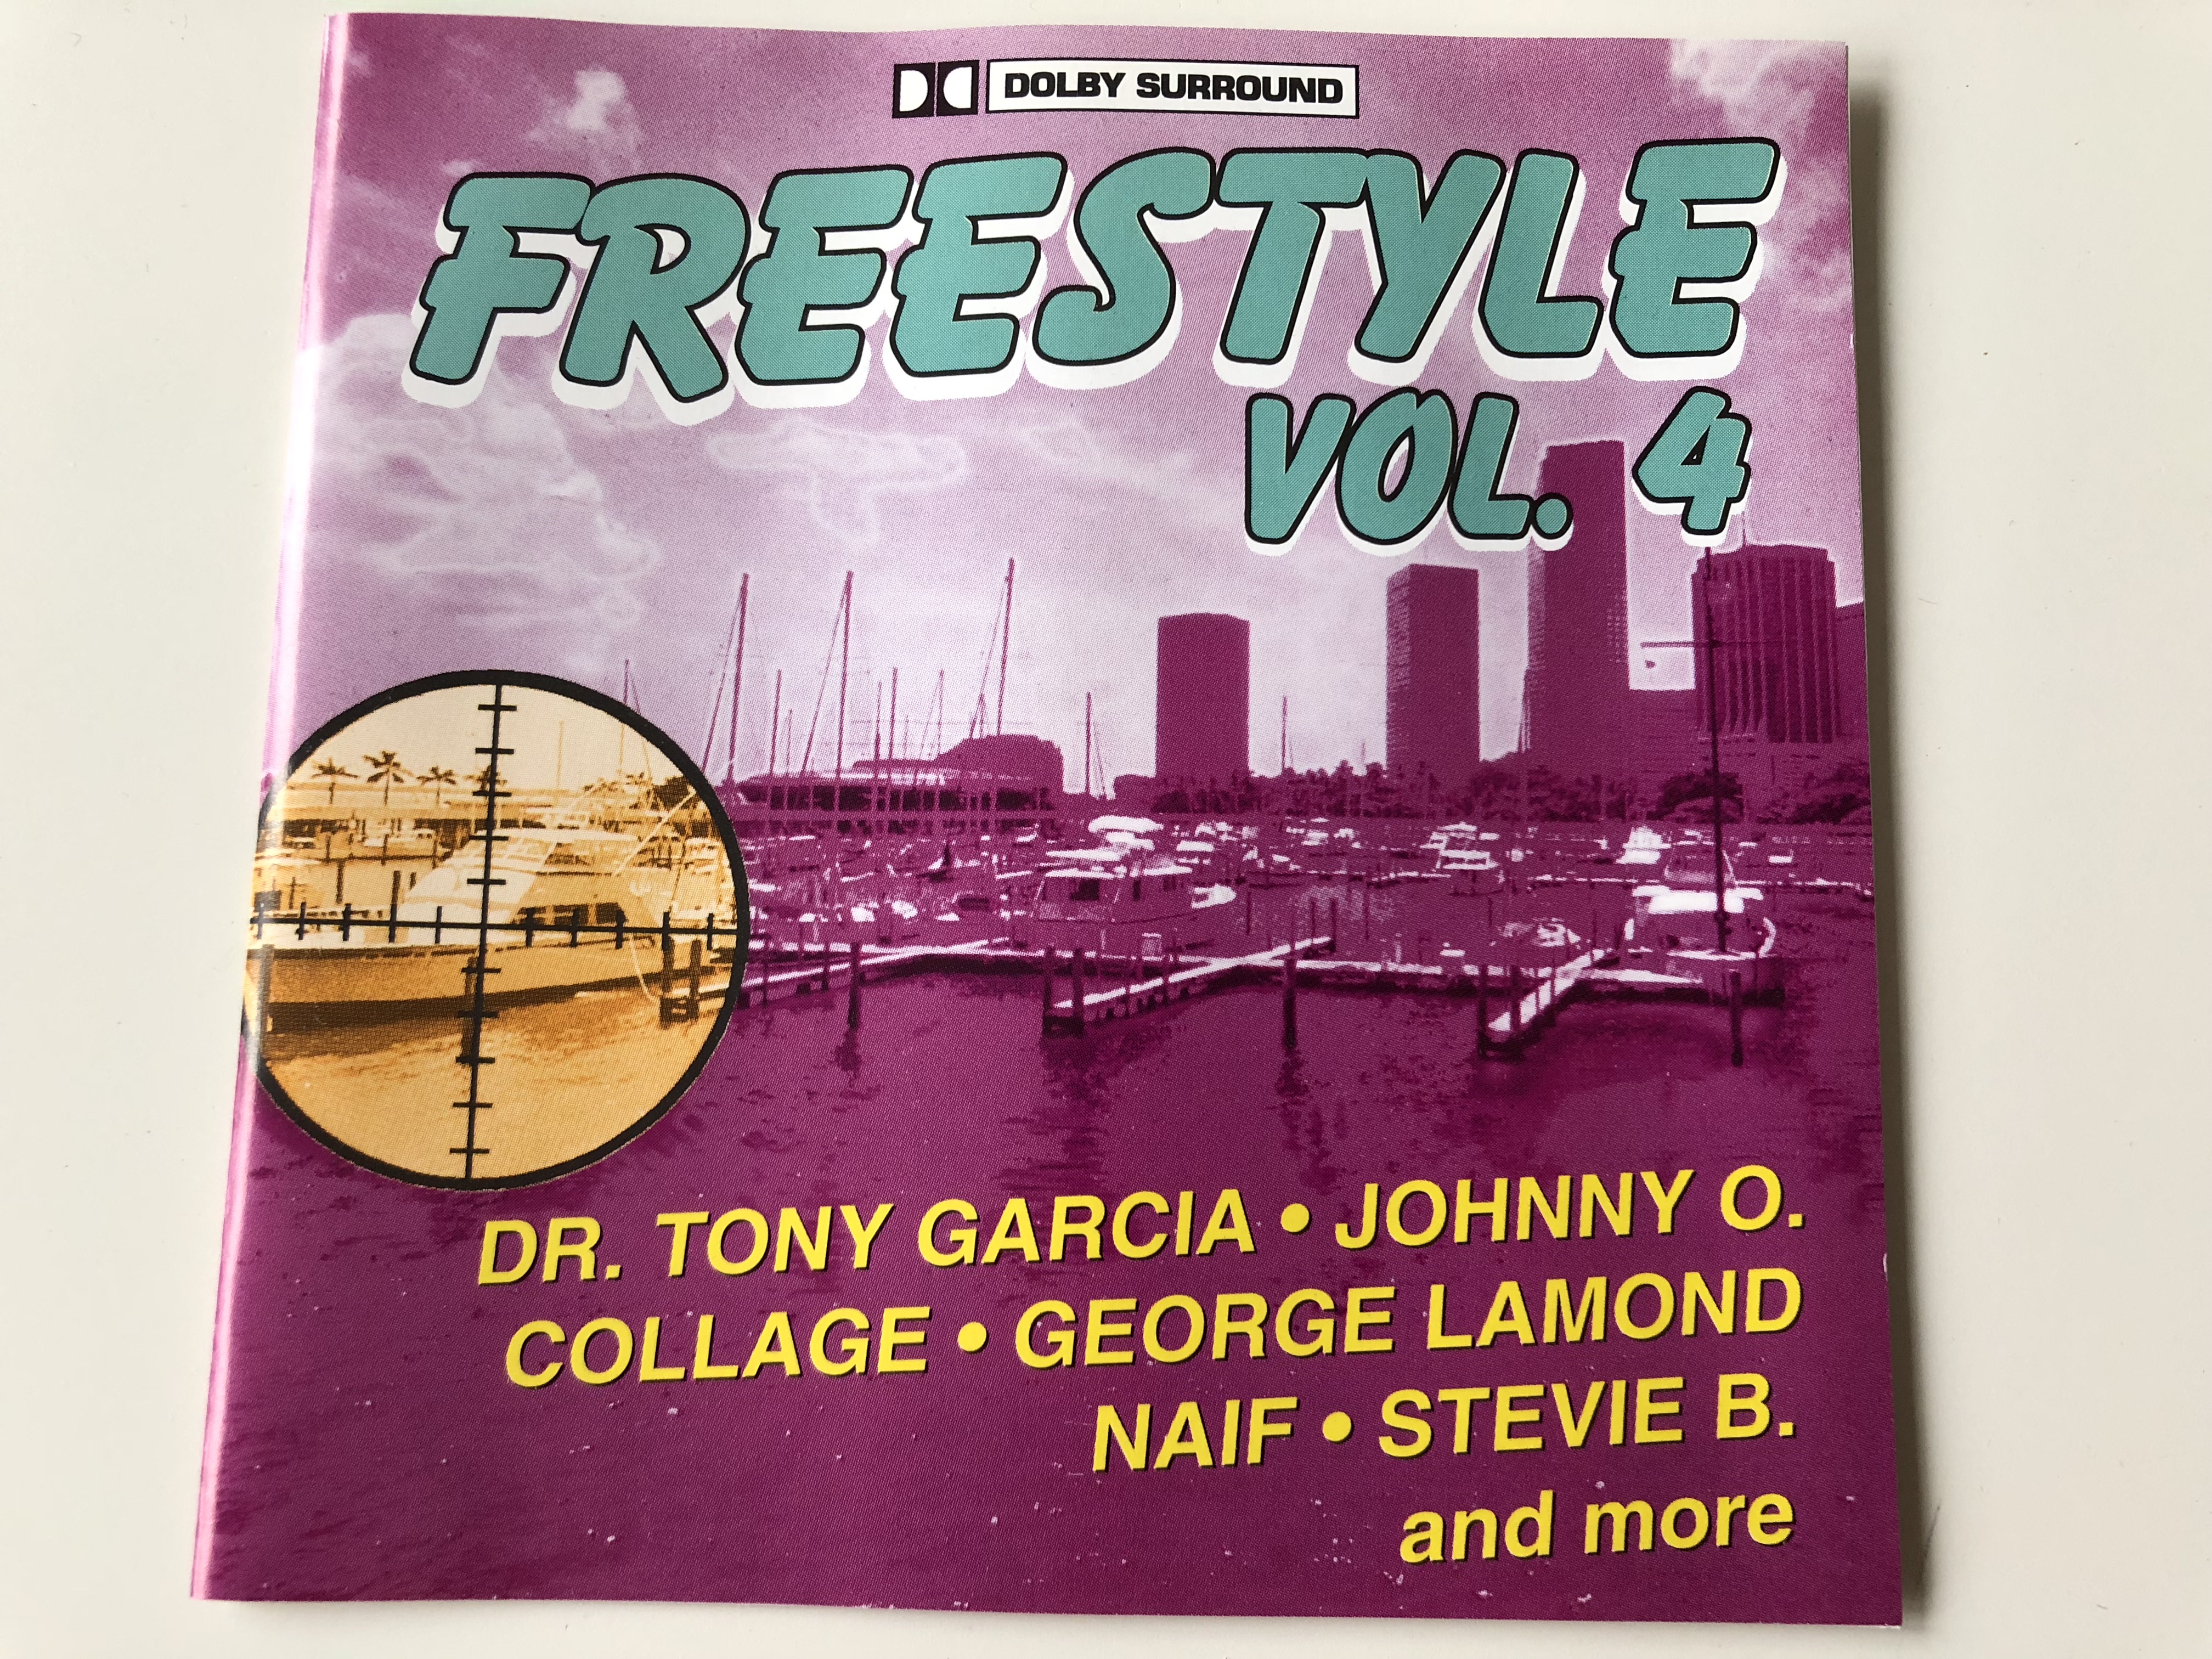 freestyle-vol.-4-dr.-tony-garcia-johnny-o.-collage-george-lamond-naif-stevie-b.-and-more-audio-cd-1997-zyx-music-1-.jpg